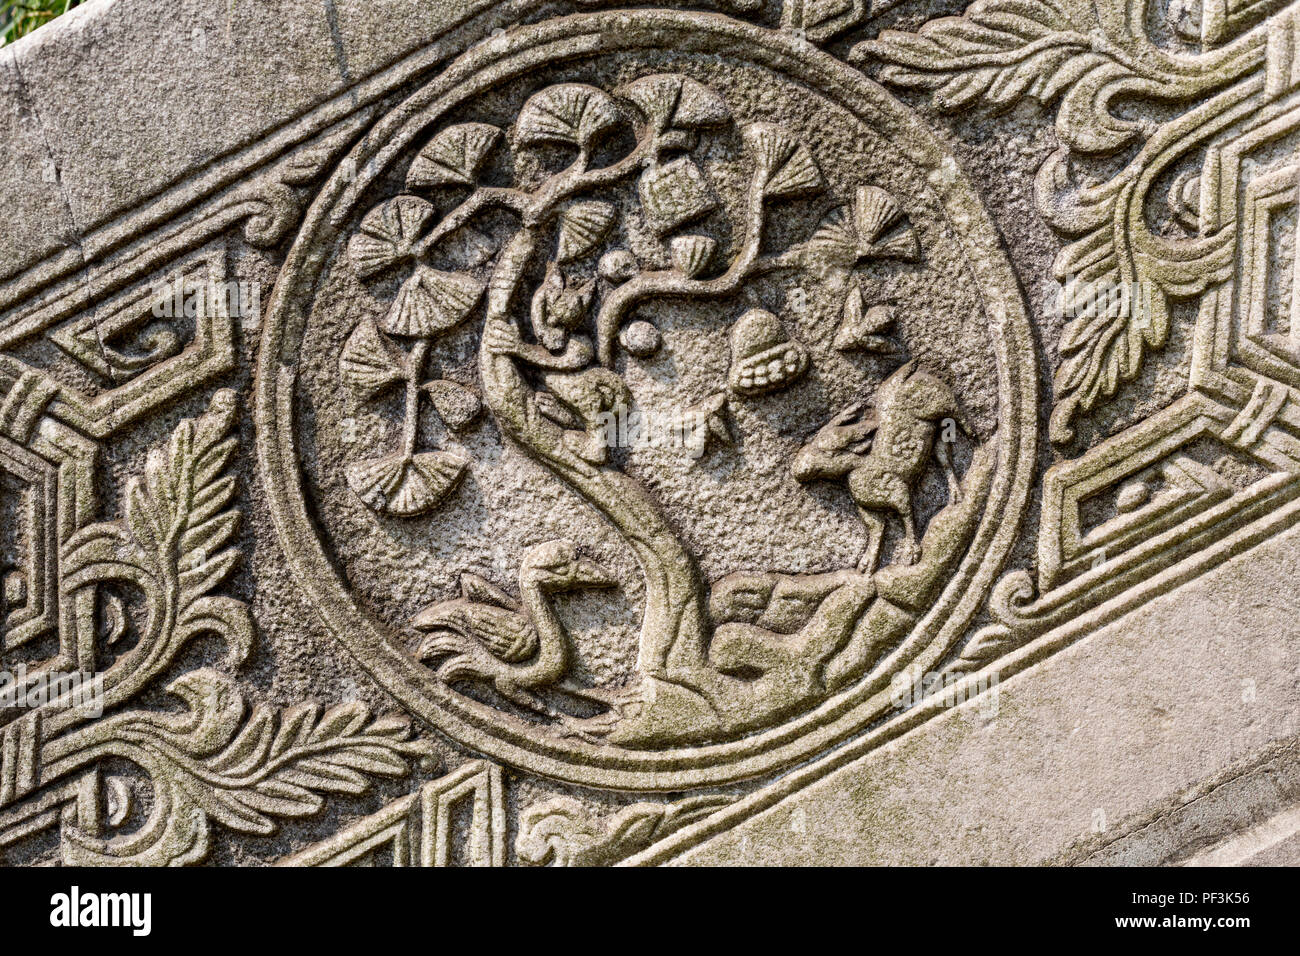 Yangzhou, Jiangsu, China.  Floral Motif Carved in Stone on Stairway Entrance to Graveyard of Puhaddin, 13th-century Muslim Missionary. Stock Photo